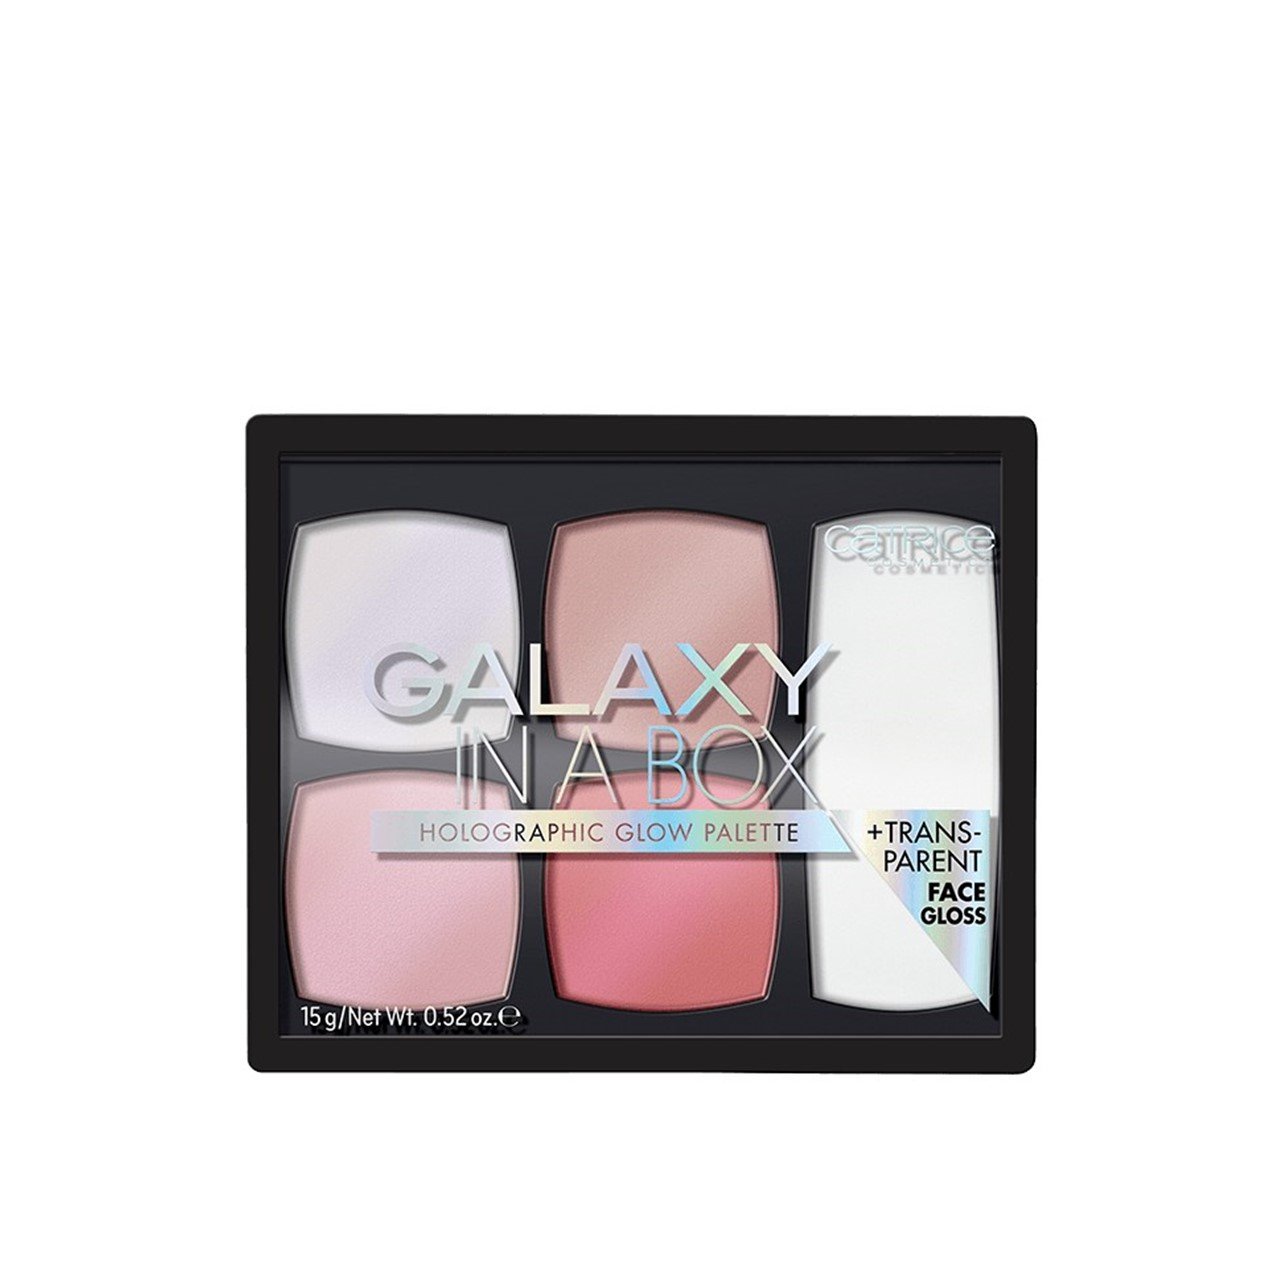 Catrice Galaxy In A Box Holographic Glow Palette 010 15g (0.53oz)